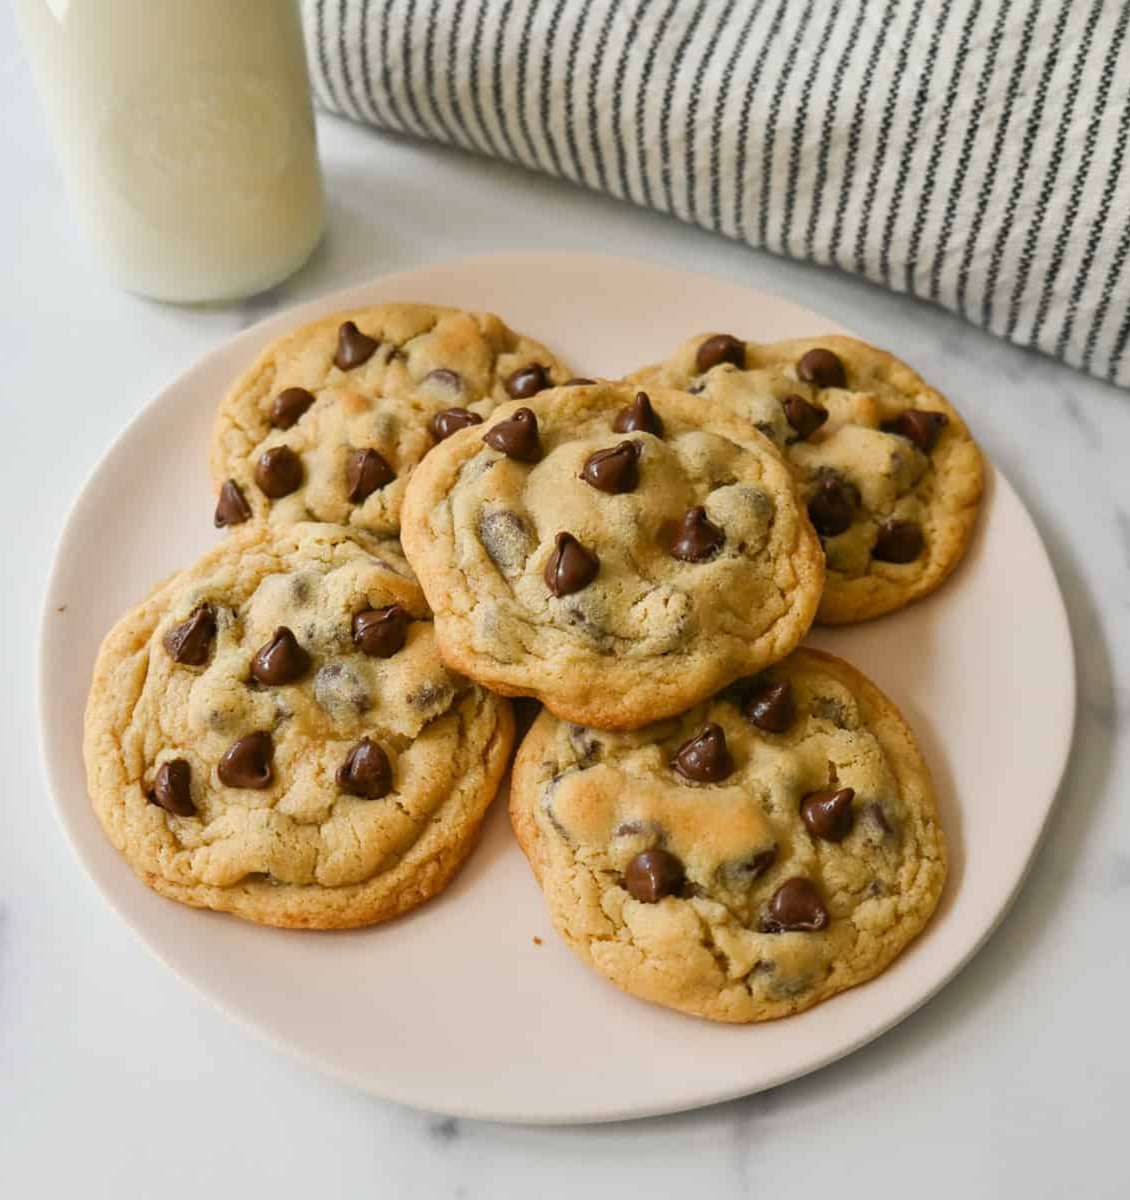 Nestle Toll House Chocolate Chip Cookies❤️❤️❤️ pussel på nätet